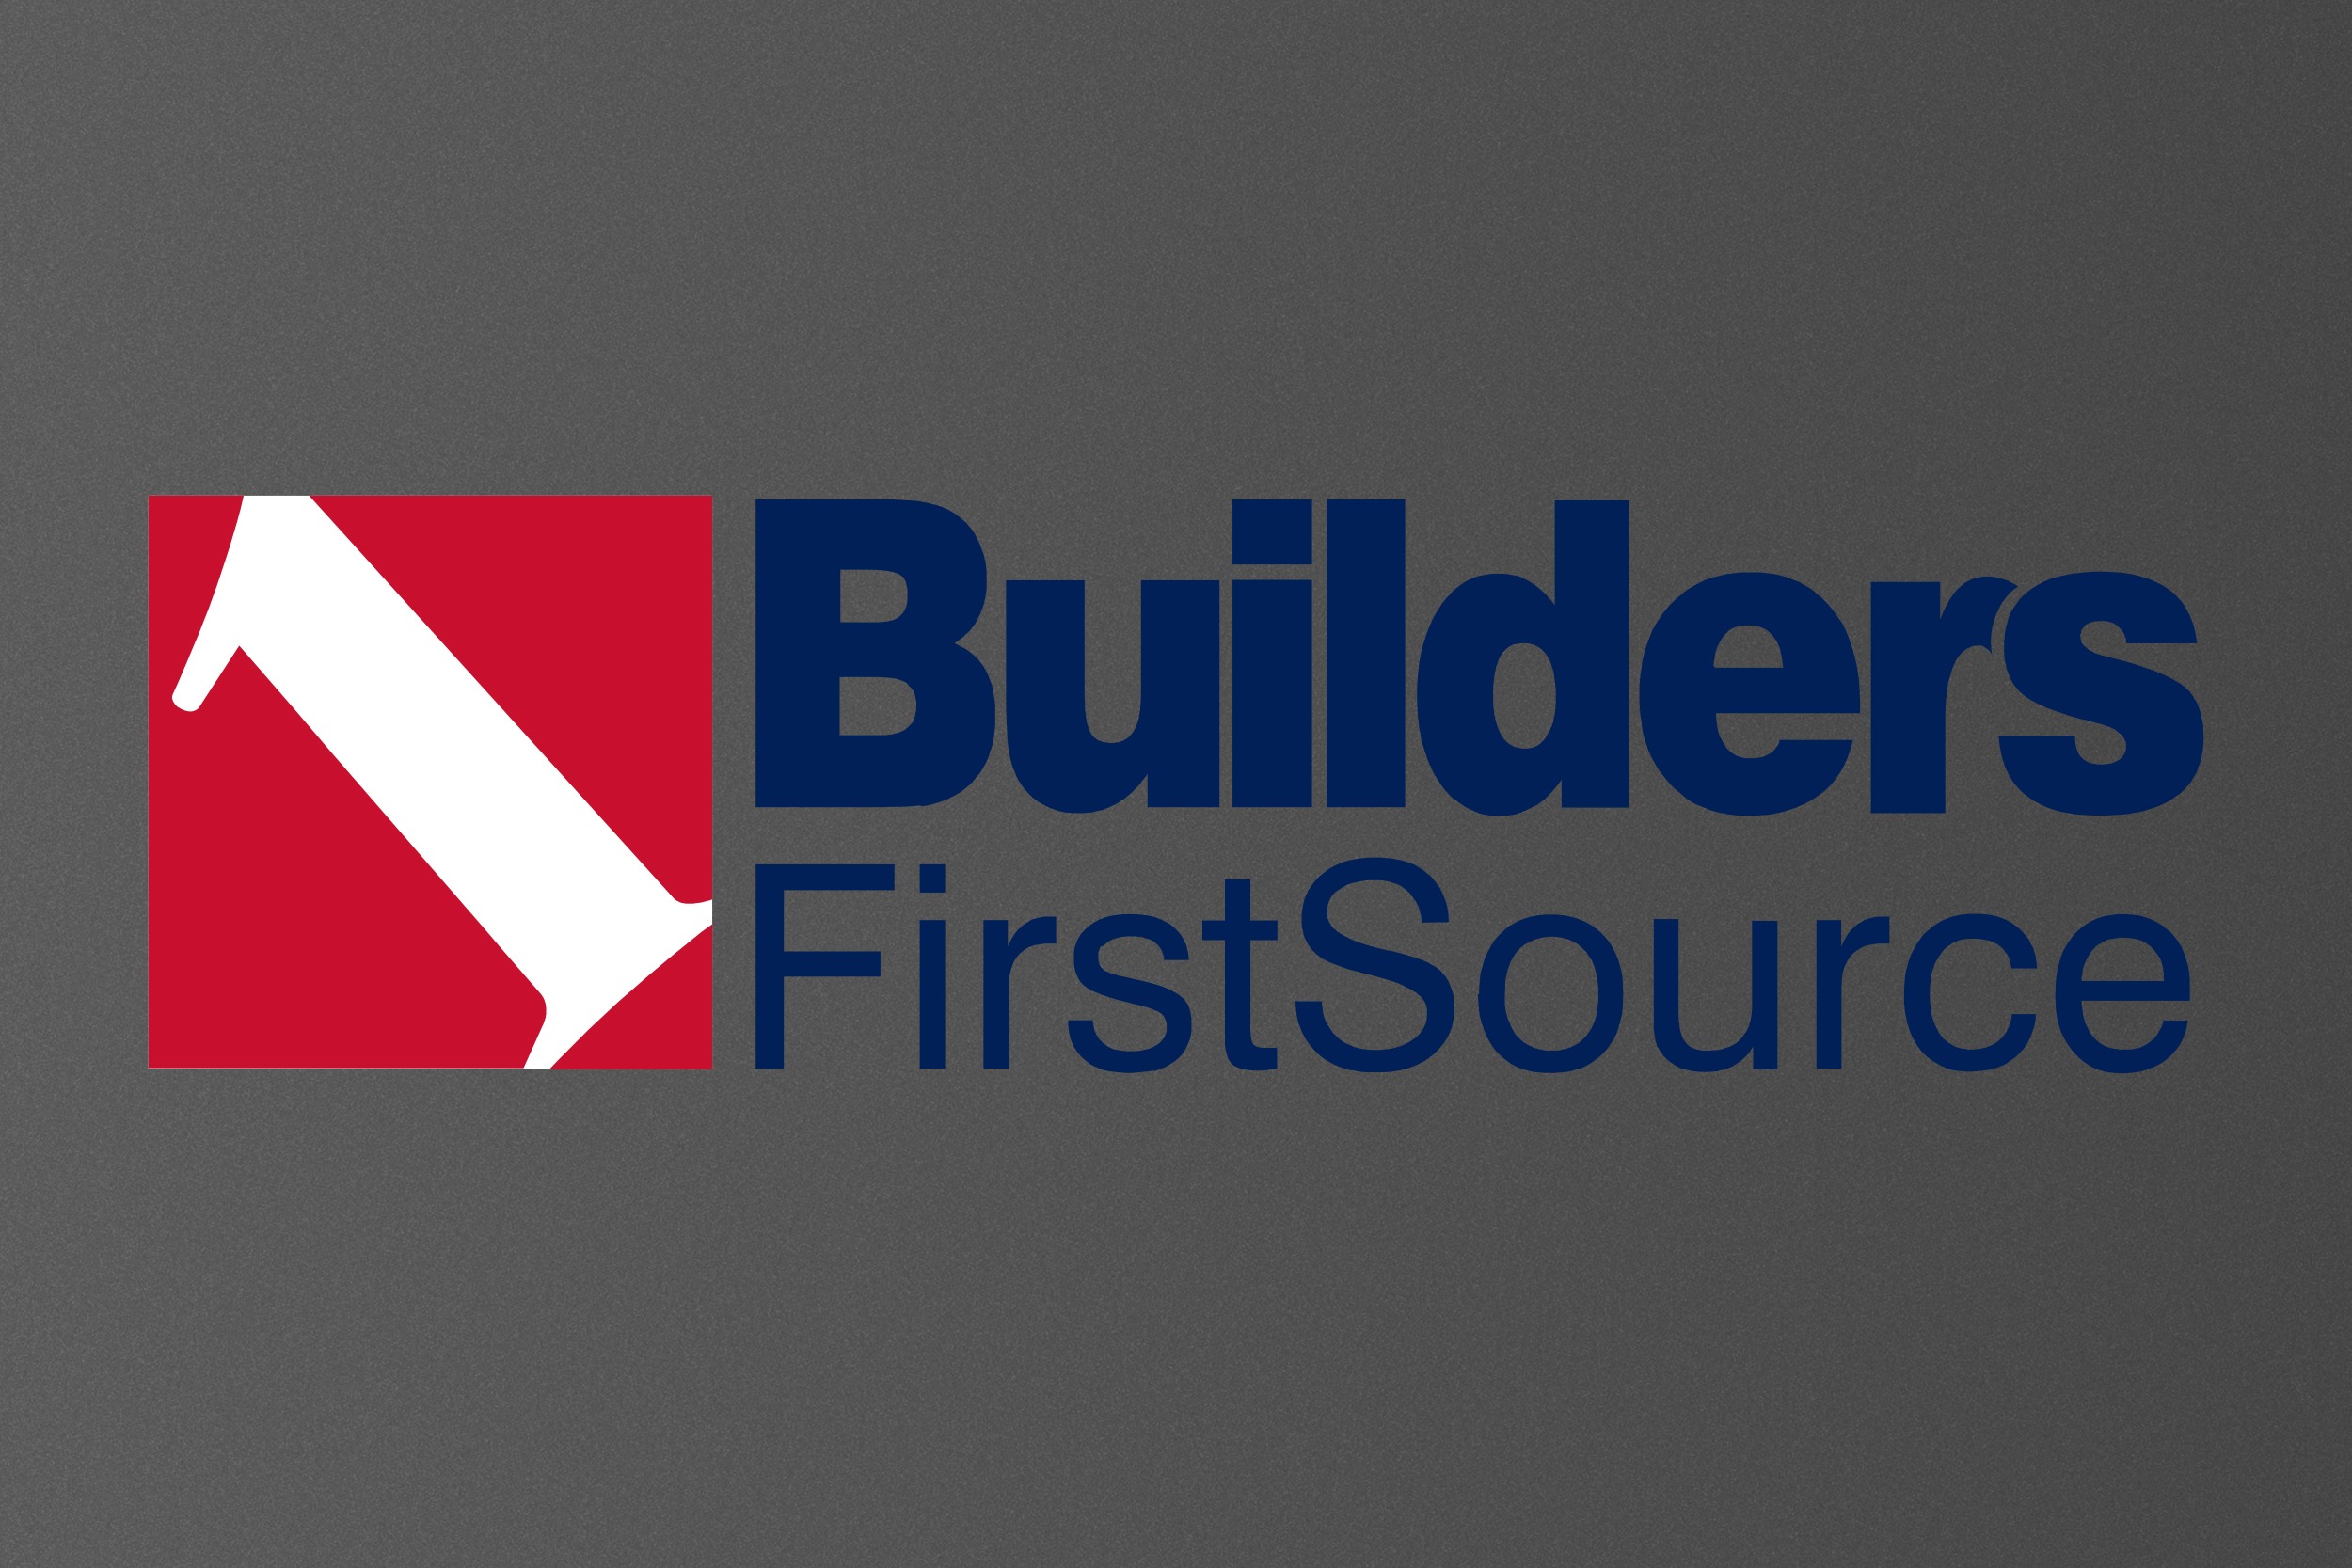 Read our comprehensive review of Builders First Source, a trusted provider of building materials and construction supplies. Discover their commitment to quality products, reliable service, and extensive range of offerings. Partner with Gott Marketing for all your building material needs and marketing solutions.